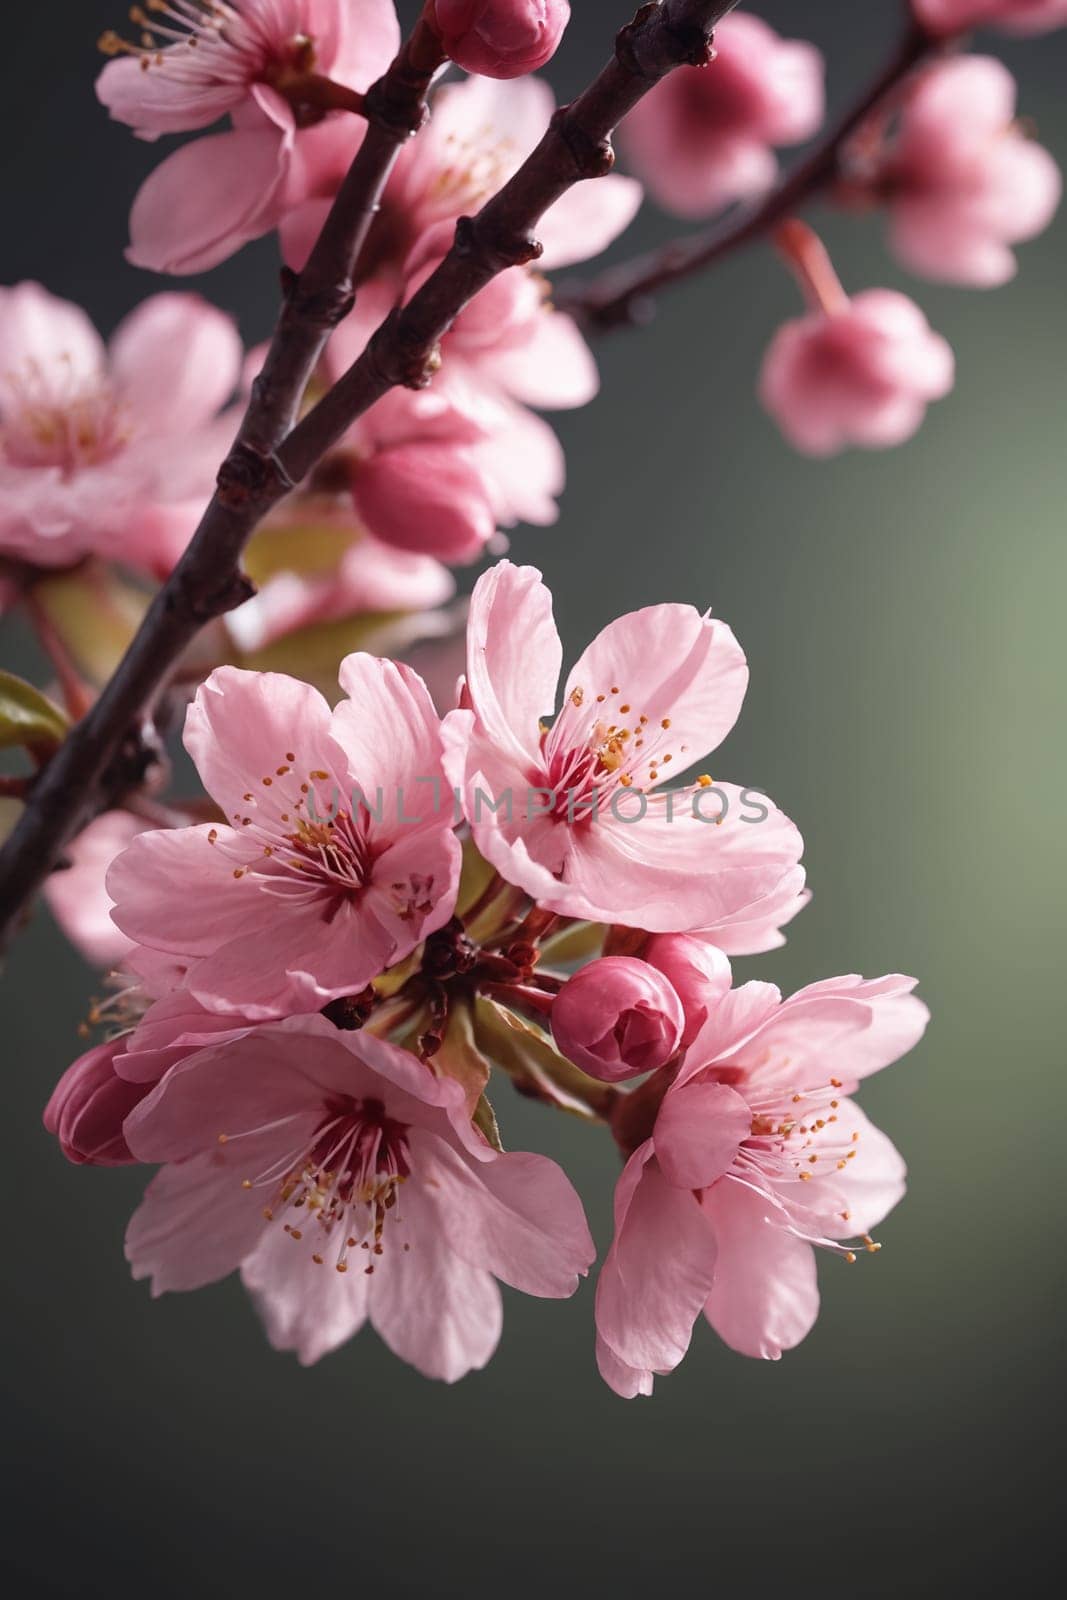 Immerse in the tradition and natural elegance of cherry blossoms, beautifully captured in this close-up shot.